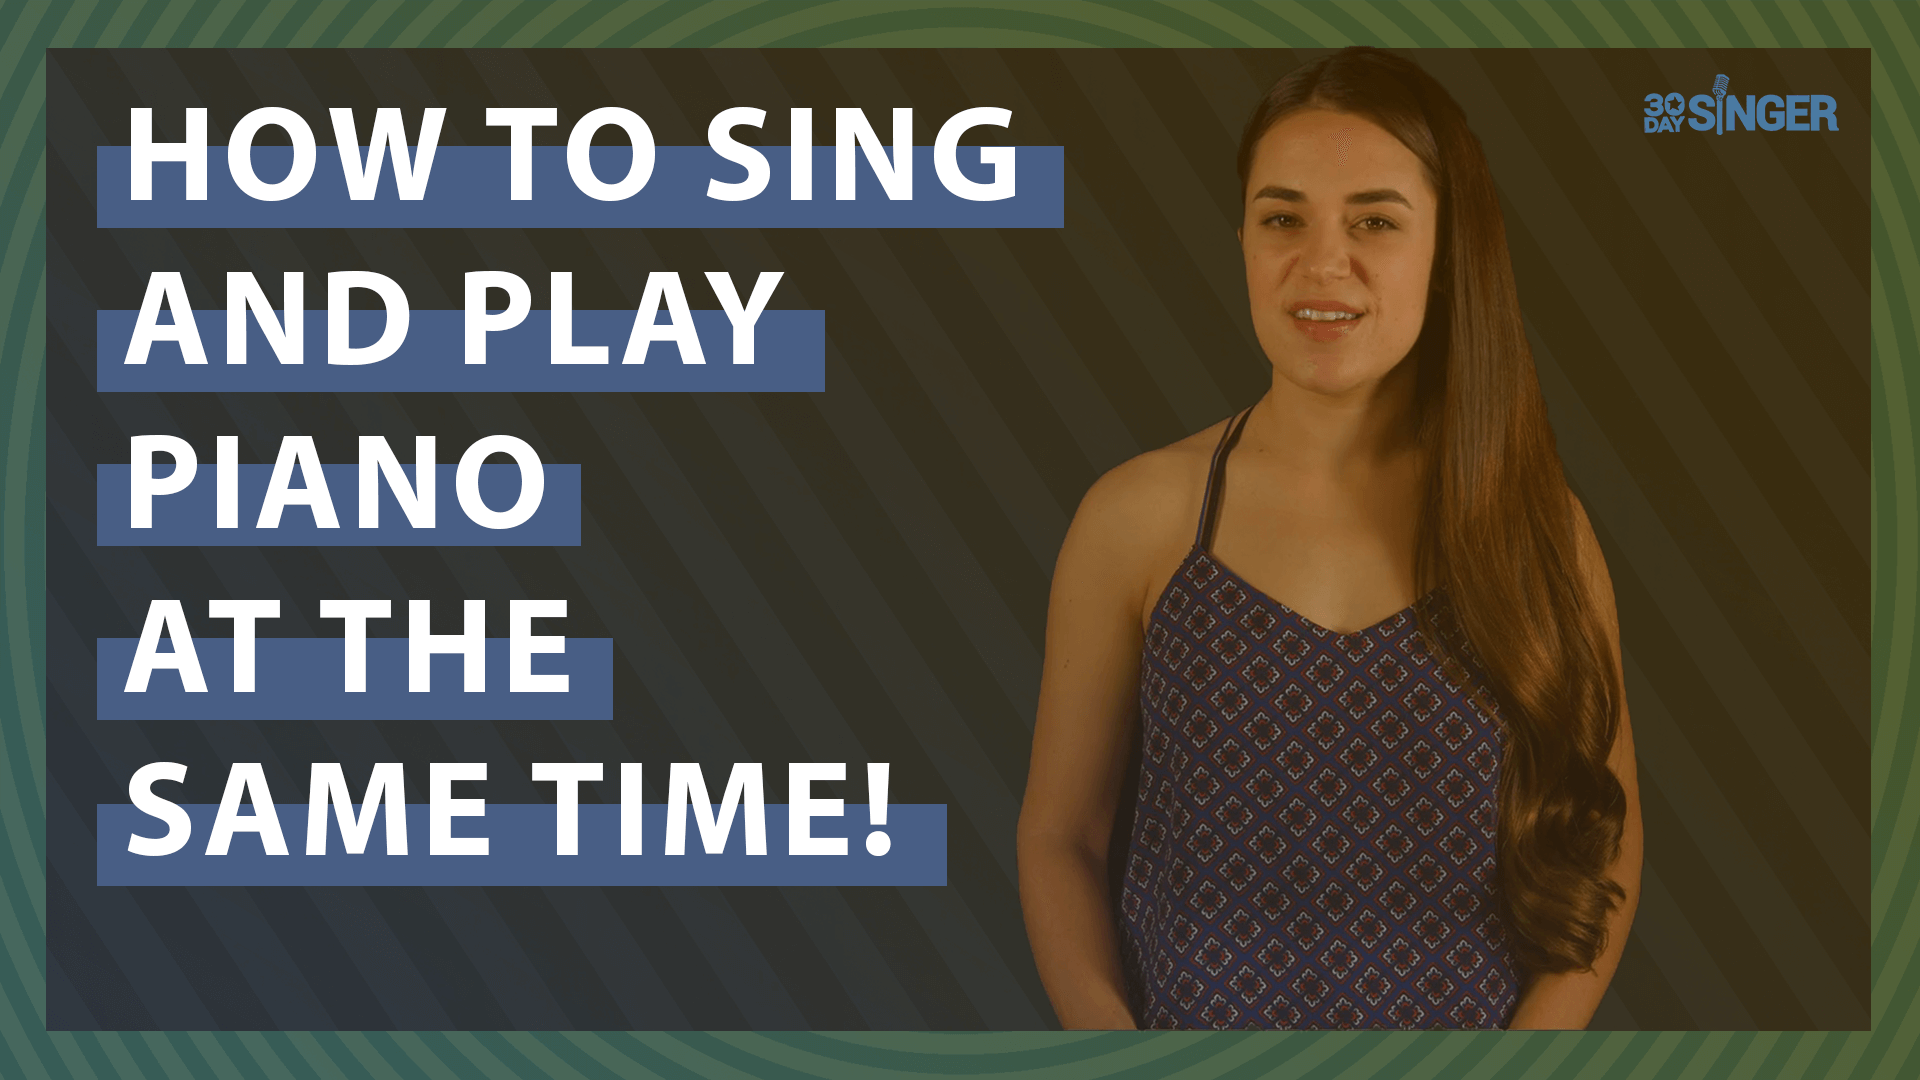 How to Sing and Play Piano at the Same Time